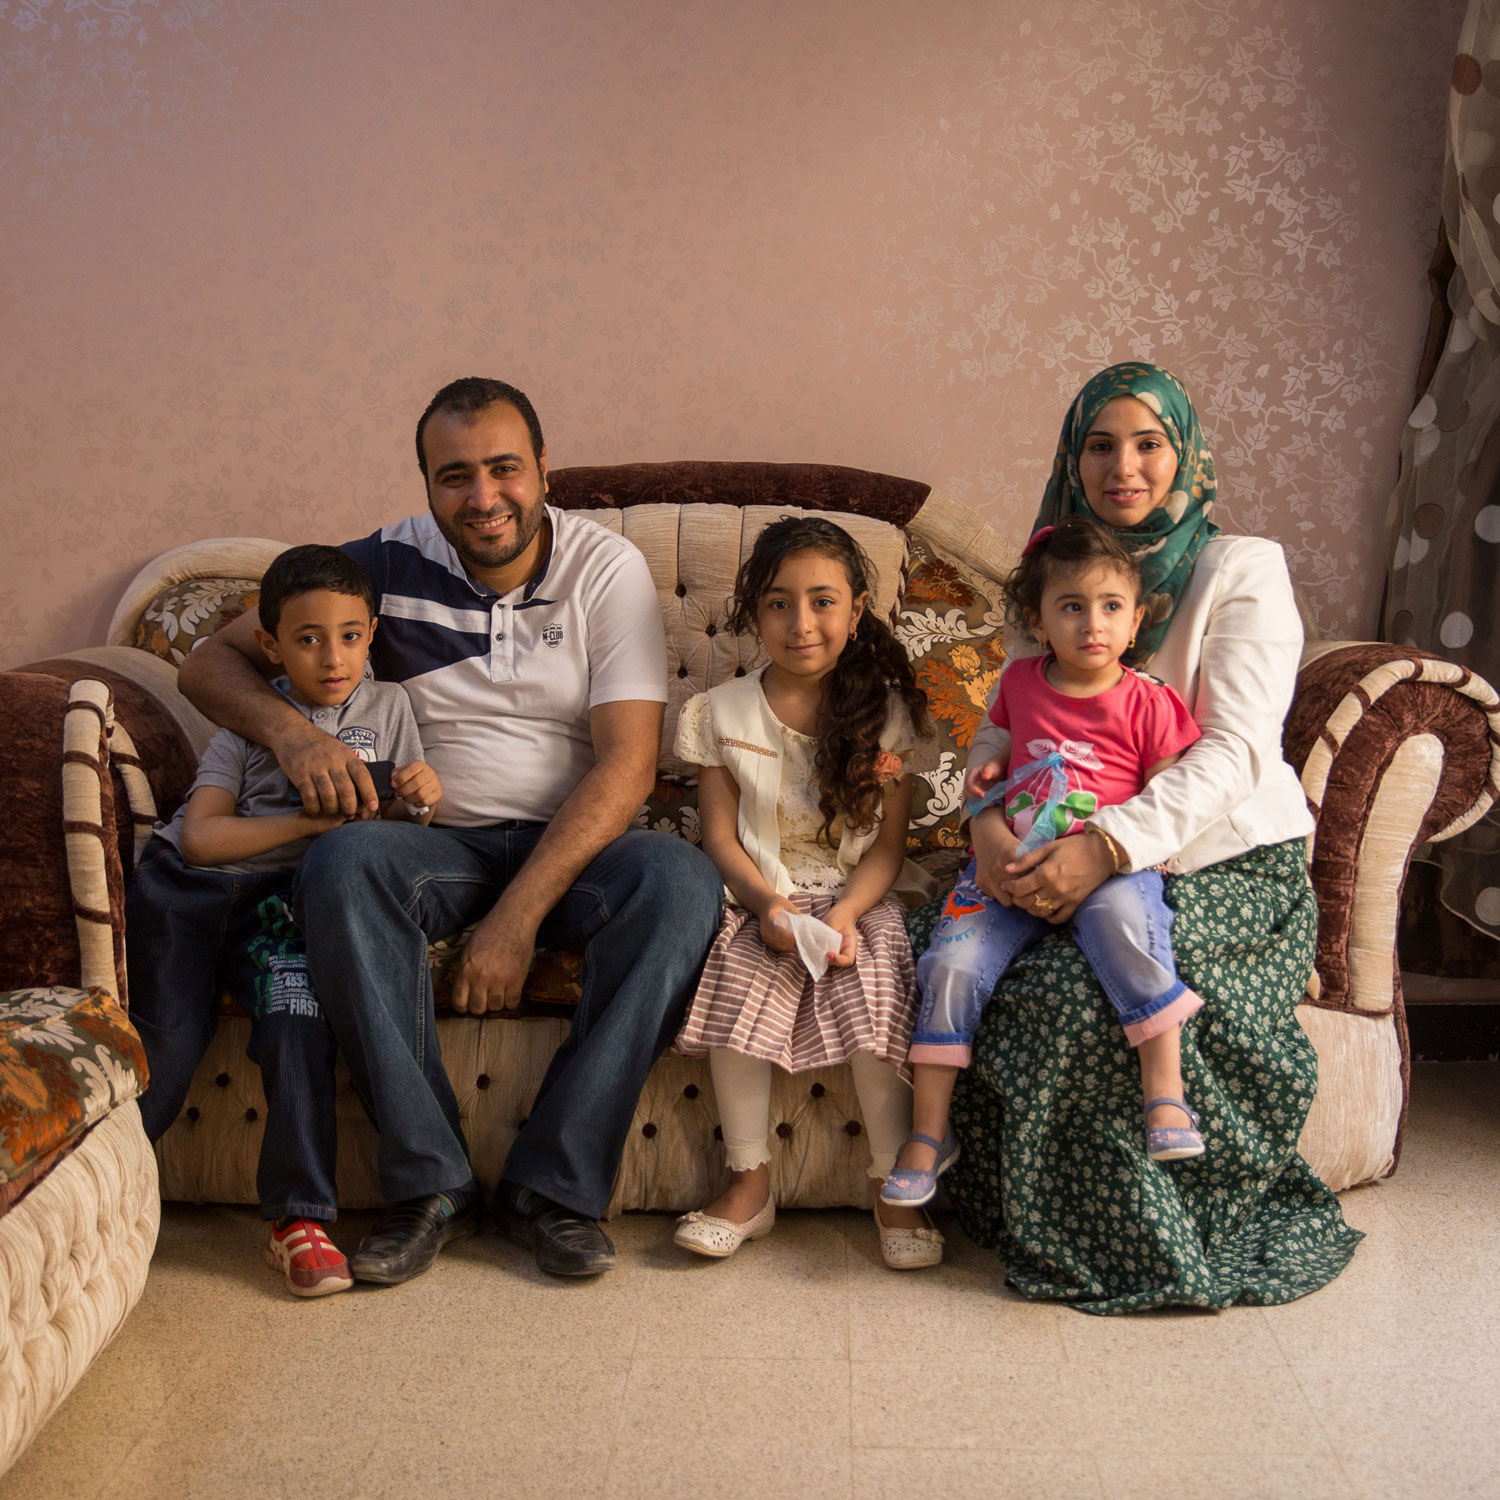  Heba and her husband Amr live in Al Quseya together with their three children.  Amr shares “I wanted to study engineering but I couldn’t, so I fully support her career. Her success is our success as she is an extension of myself.”   Photo for USAID/Egypt.  